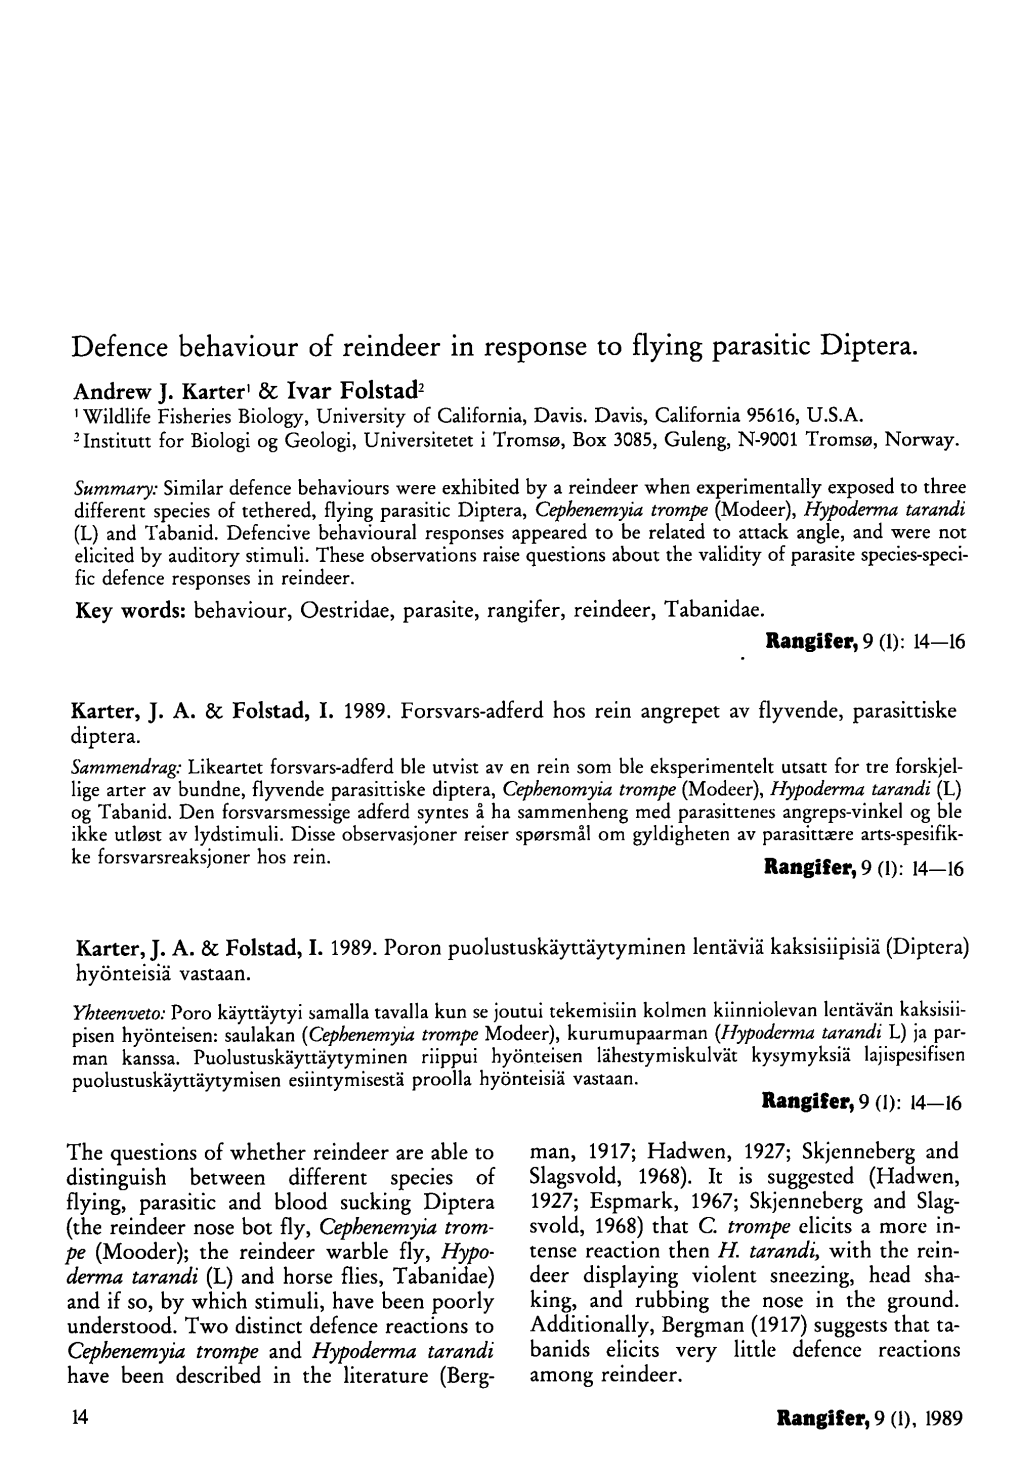 Defence Behaviour of Reindeer in Response to Flying Parasitic Diptera